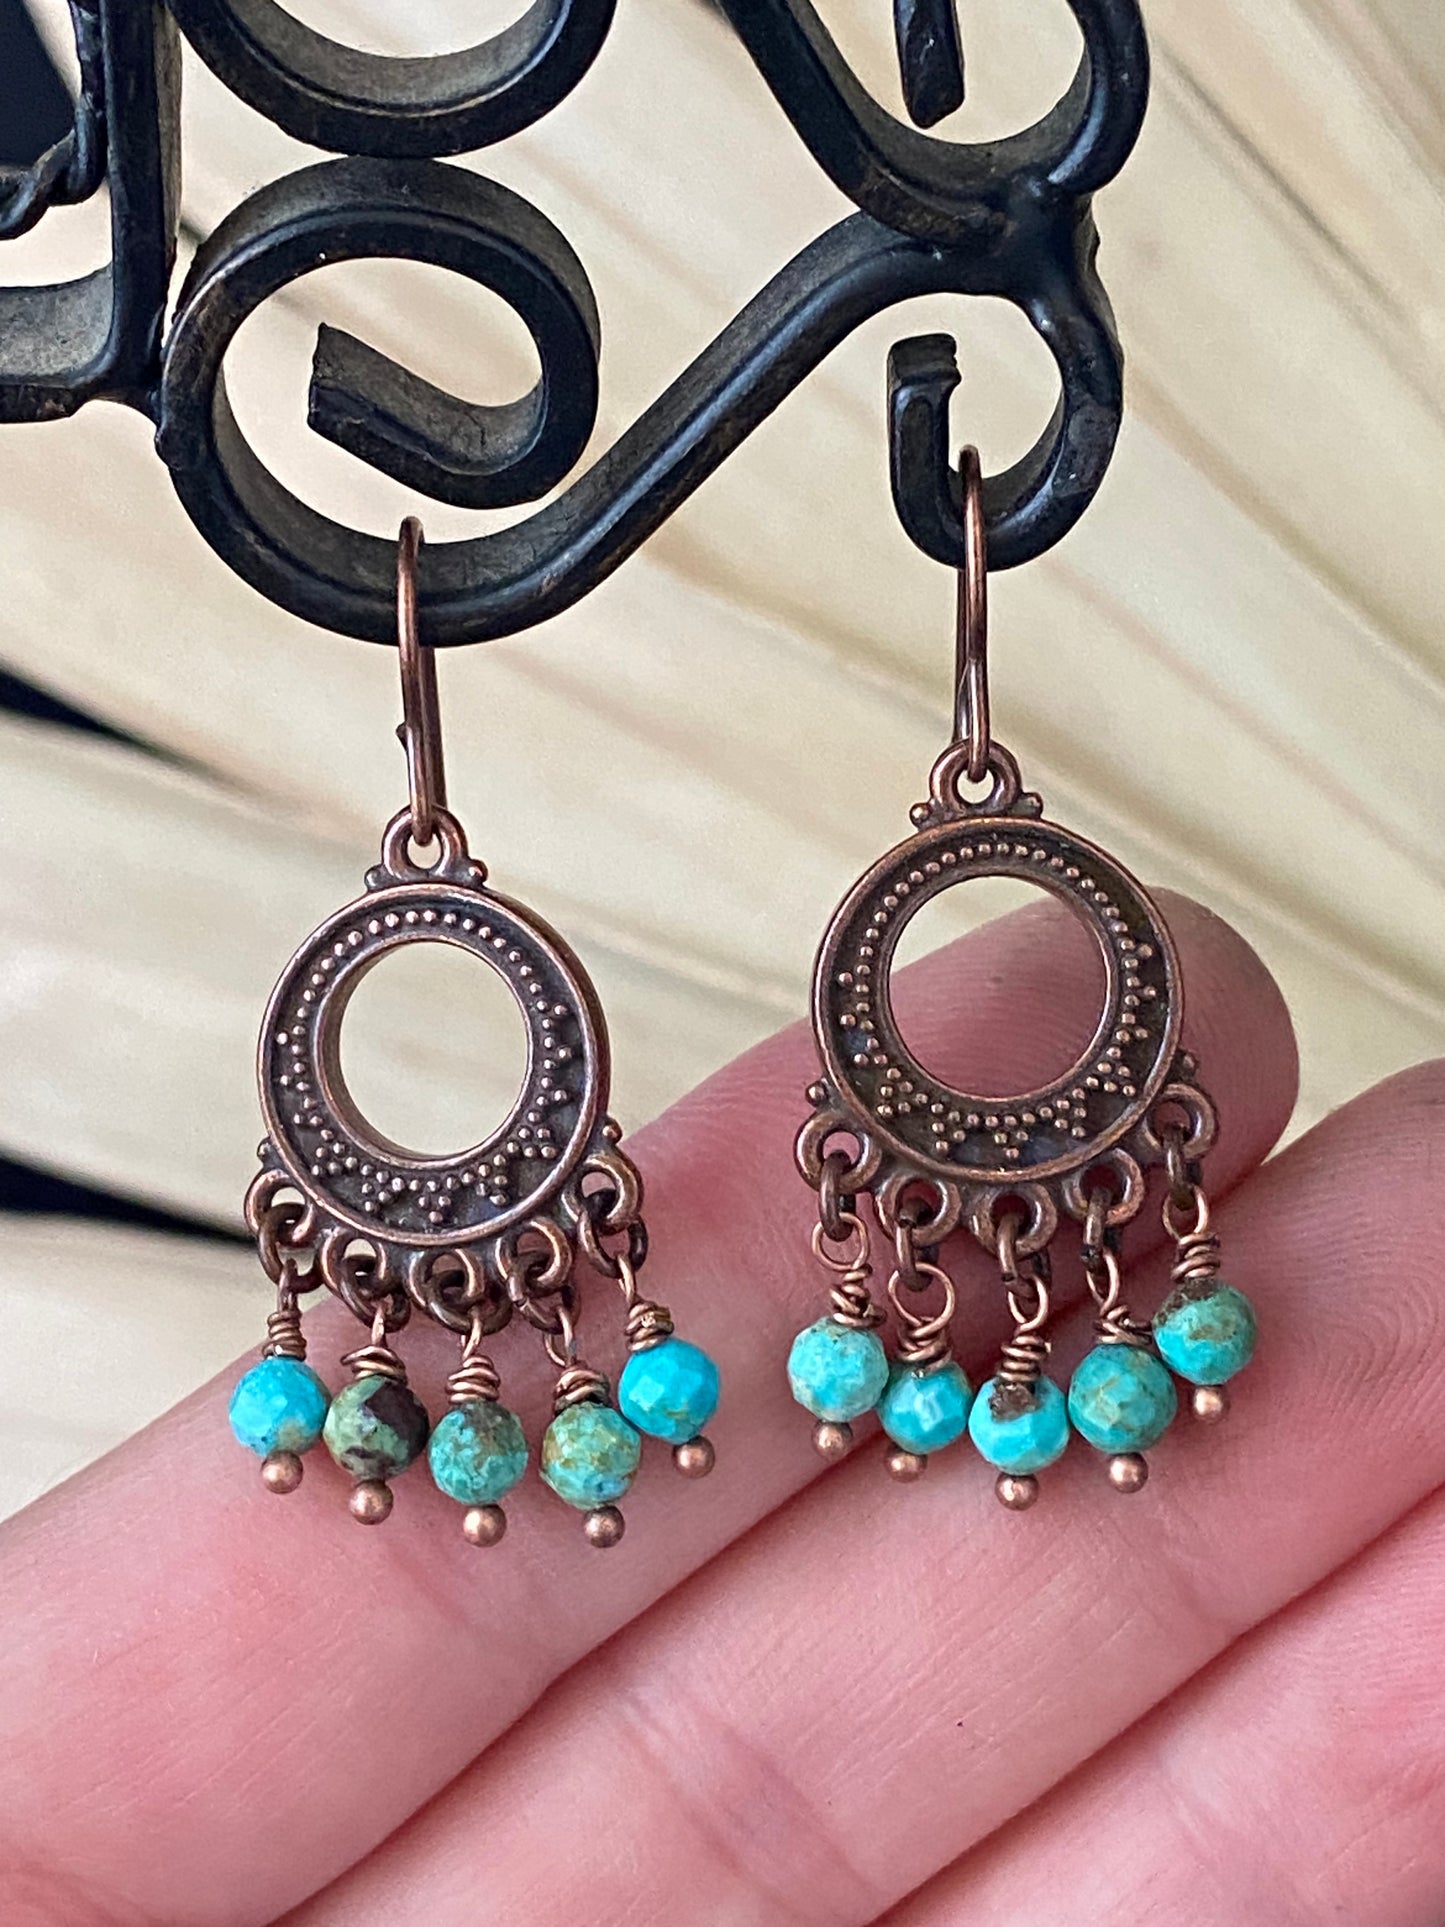 Turquoise stone, copper metal charm, earrings, jewelry.